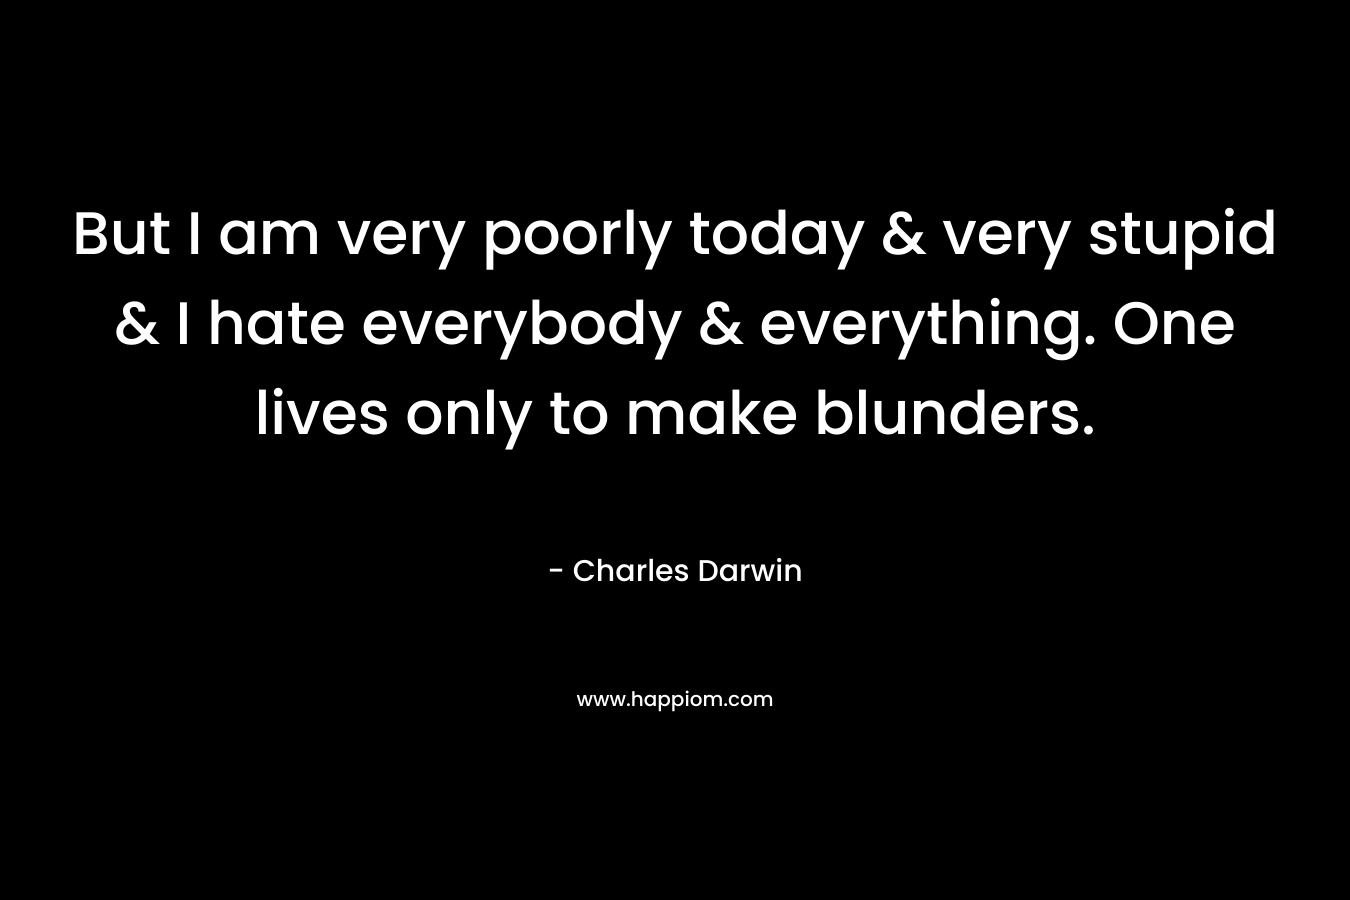 But I am very poorly today & very stupid & I hate everybody & everything. One lives only to make blunders. – Charles Darwin